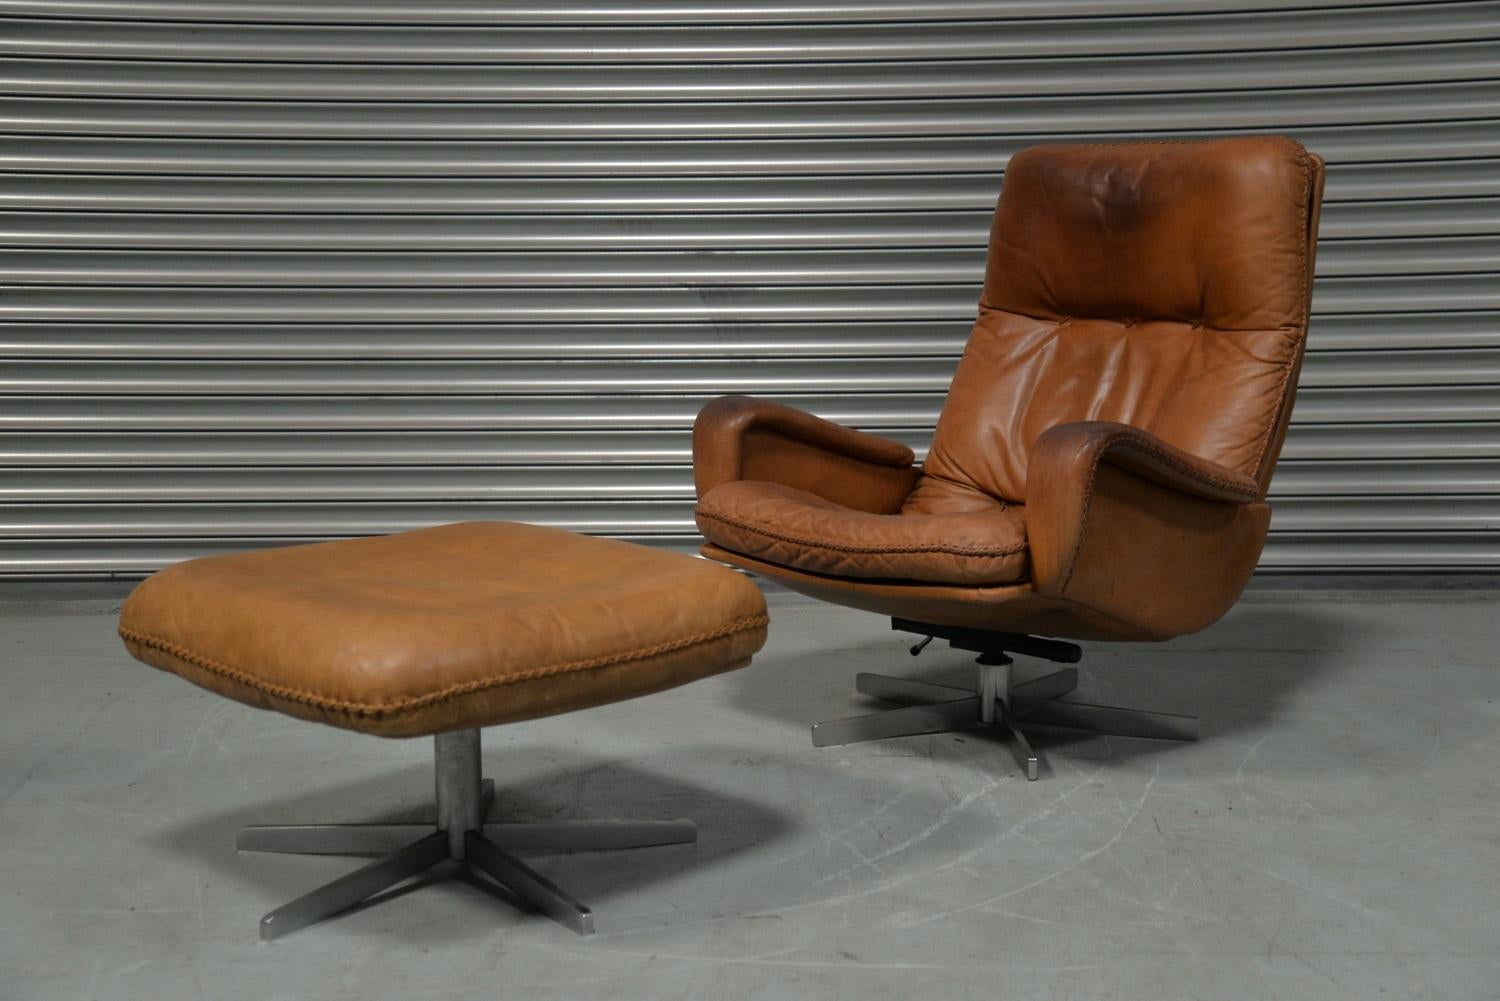 Discounted airfreight for our US and International customers ( from 2 weeks door to door)

We are delighted to bring to you an ultra-rare and highly desirable De Sede S 231 vintage lounge swivel club armchair and ottoman. Built in the late 1960s by